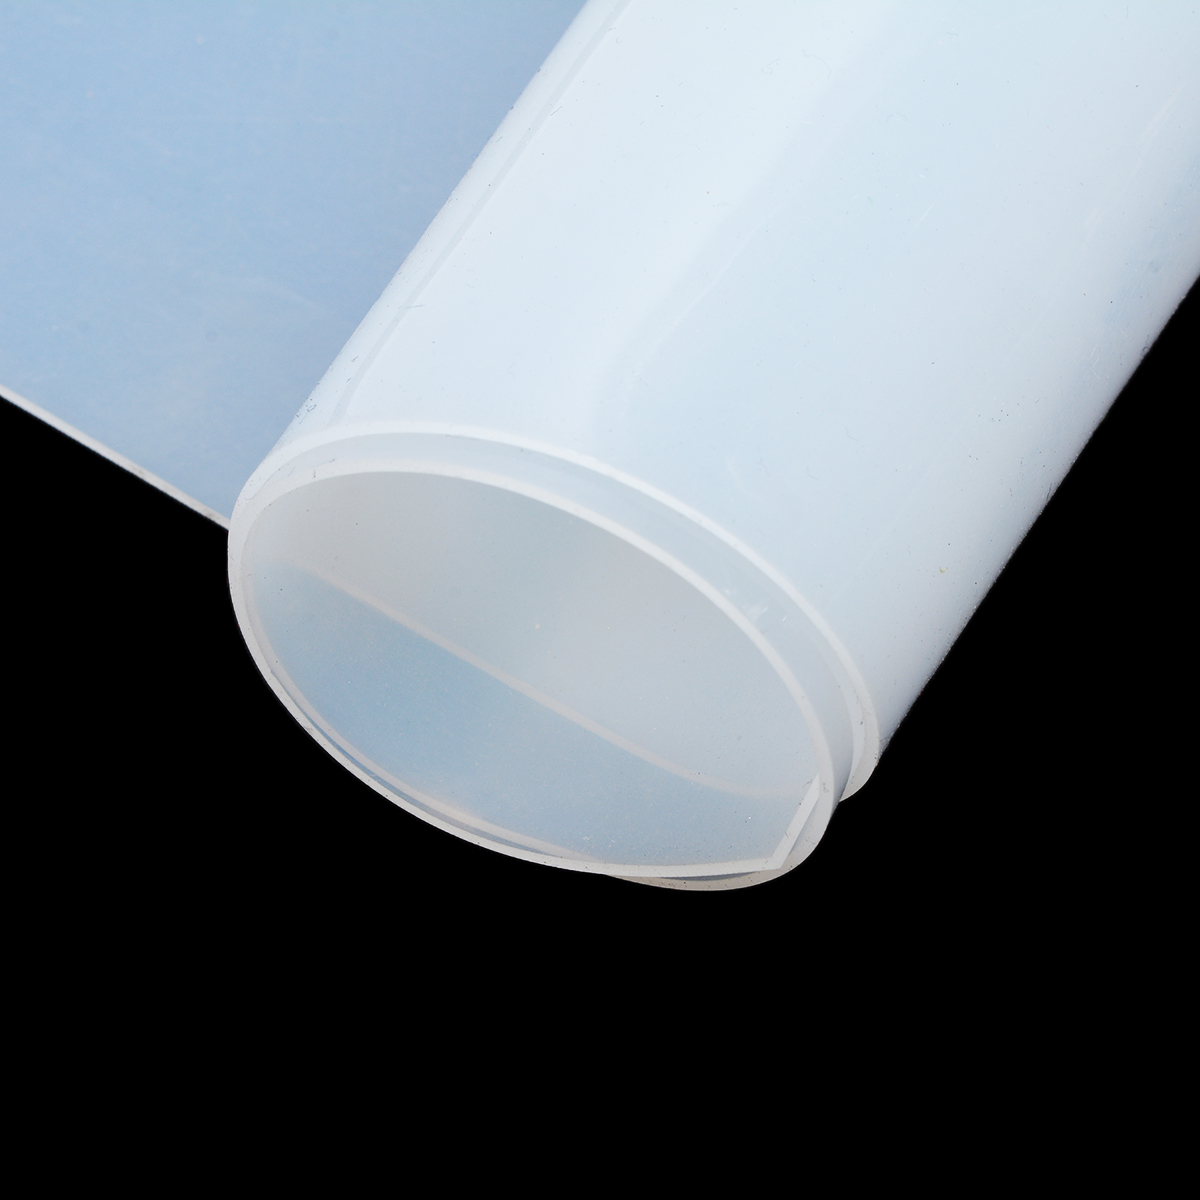 1pc 500*500mm Silicone Rubber Sheet 1mm Thickness Heat-resistant Plate Translucent Mat